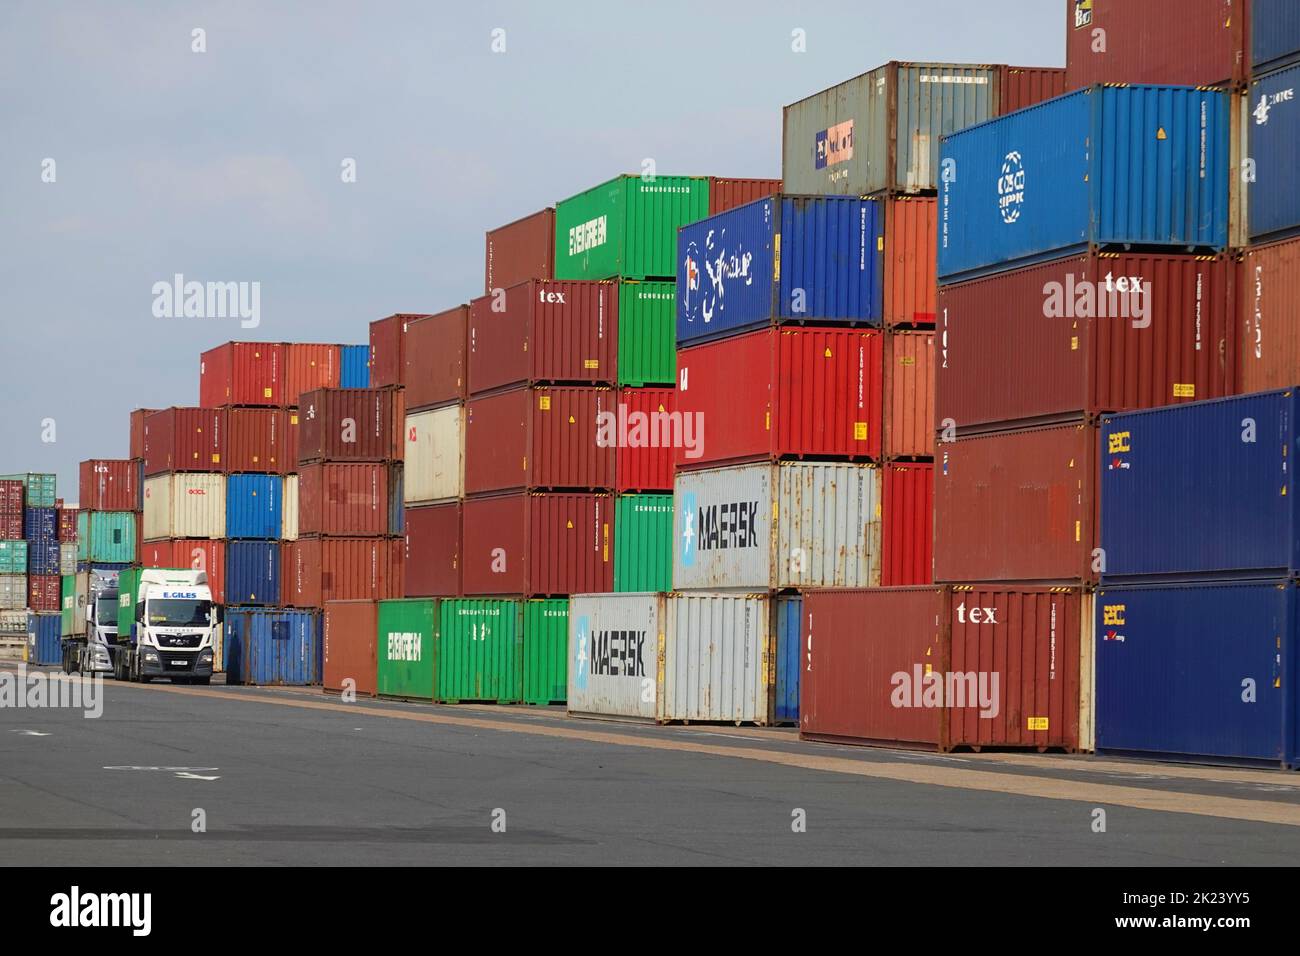 Felixstowe, Suffolk, UK - 22 September 2022 : Containers stacked at the port. Stock Photo